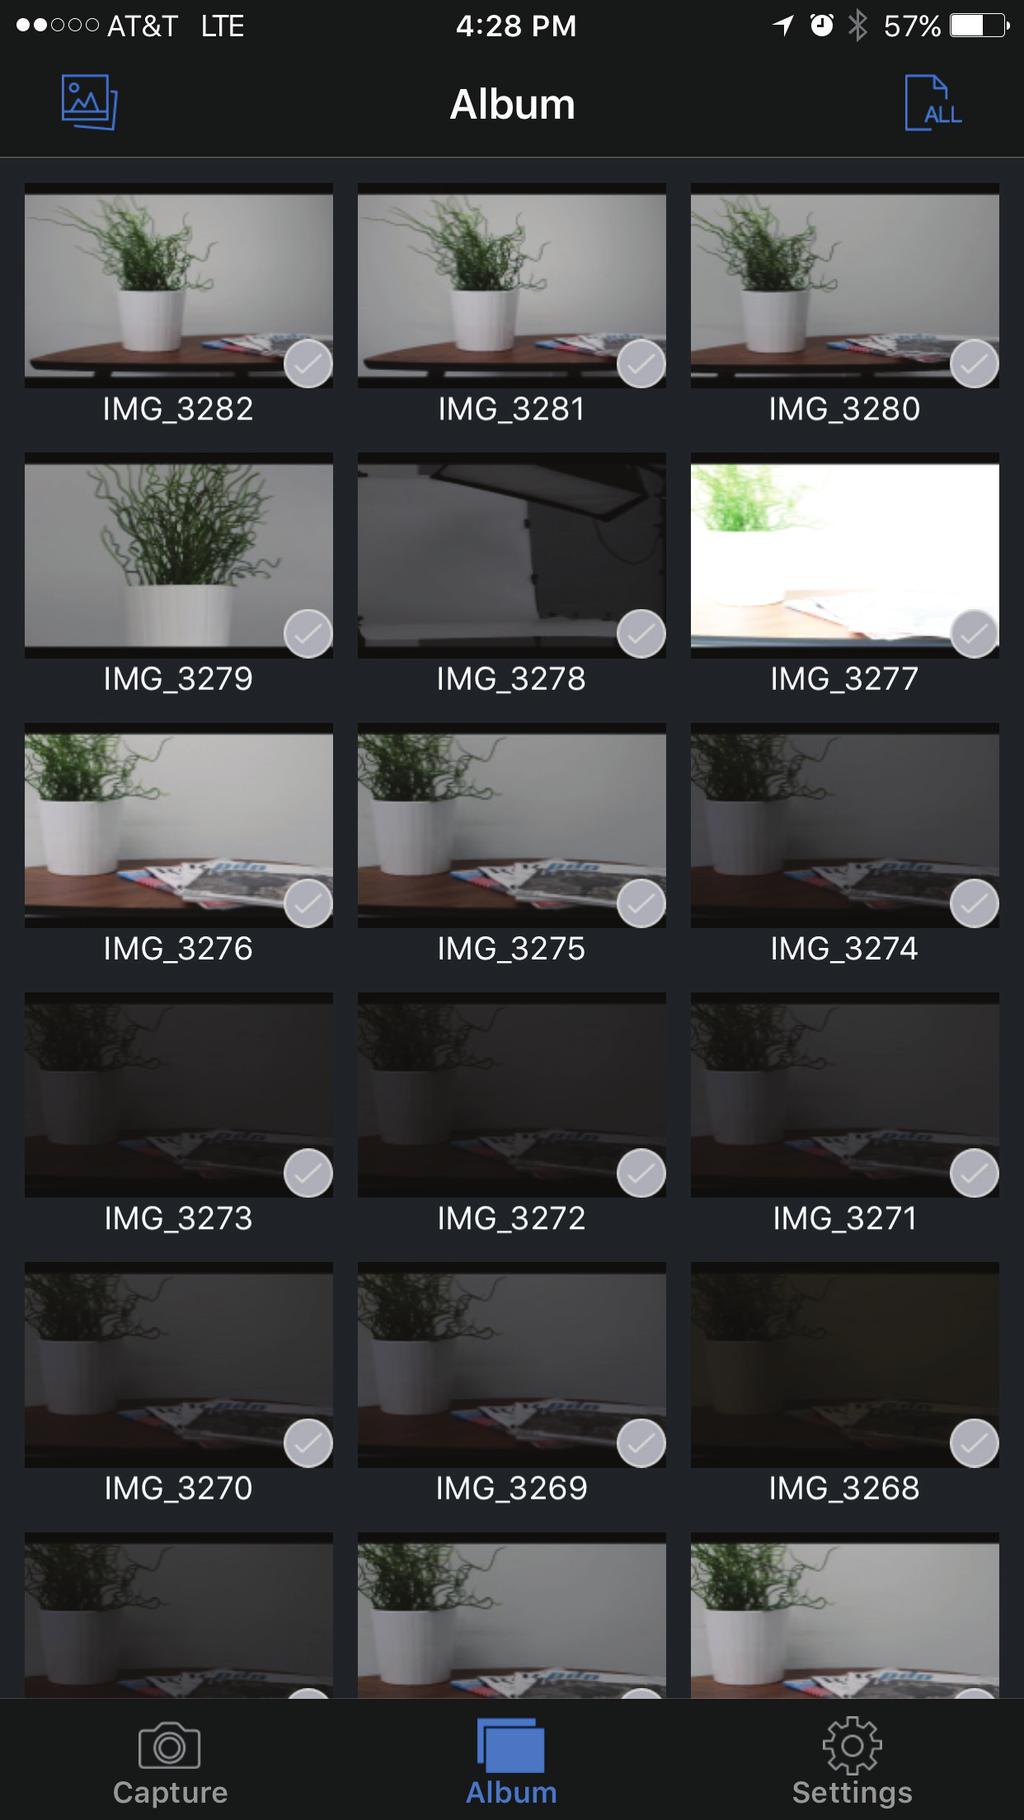 Photos on the phone, tablet or computer. Media filter based on JPEG, RAW and Video files.